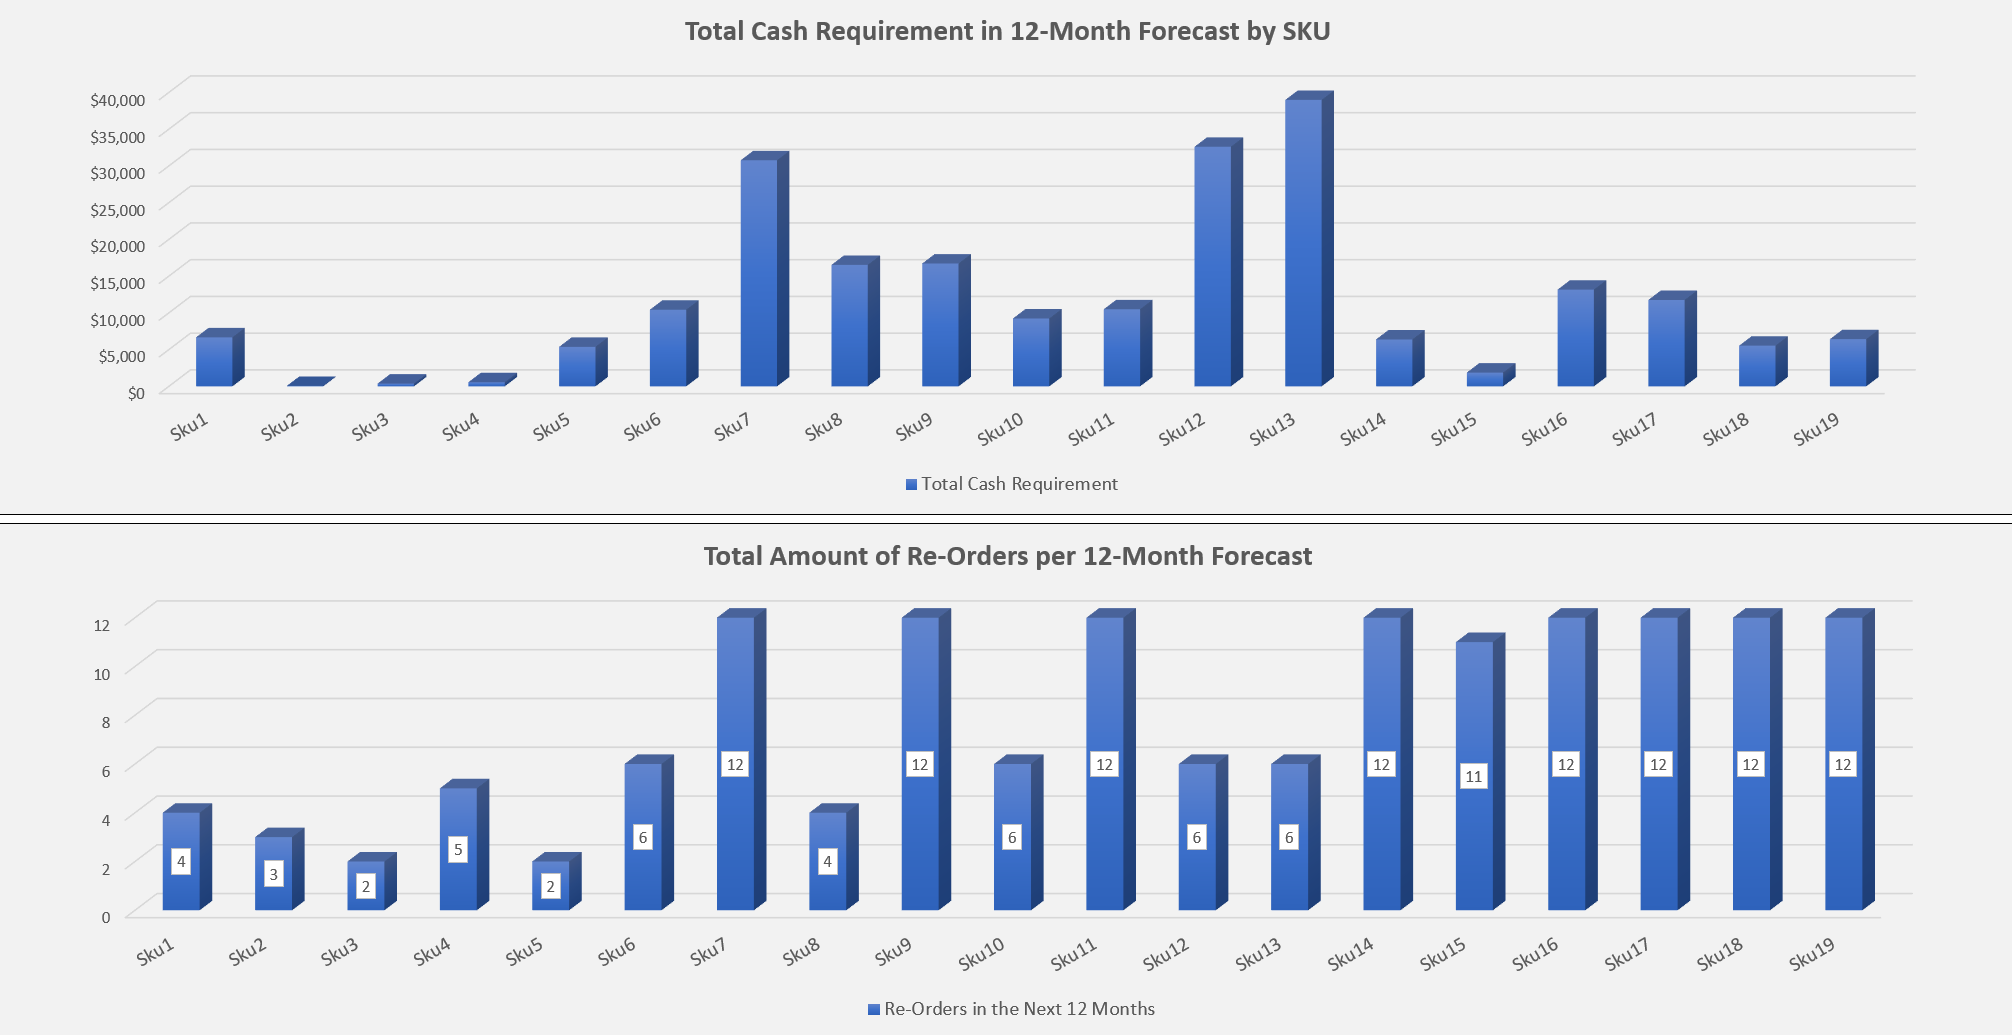 Inventory Restocking and Cash Requirement Forecast: Up to 36 Months